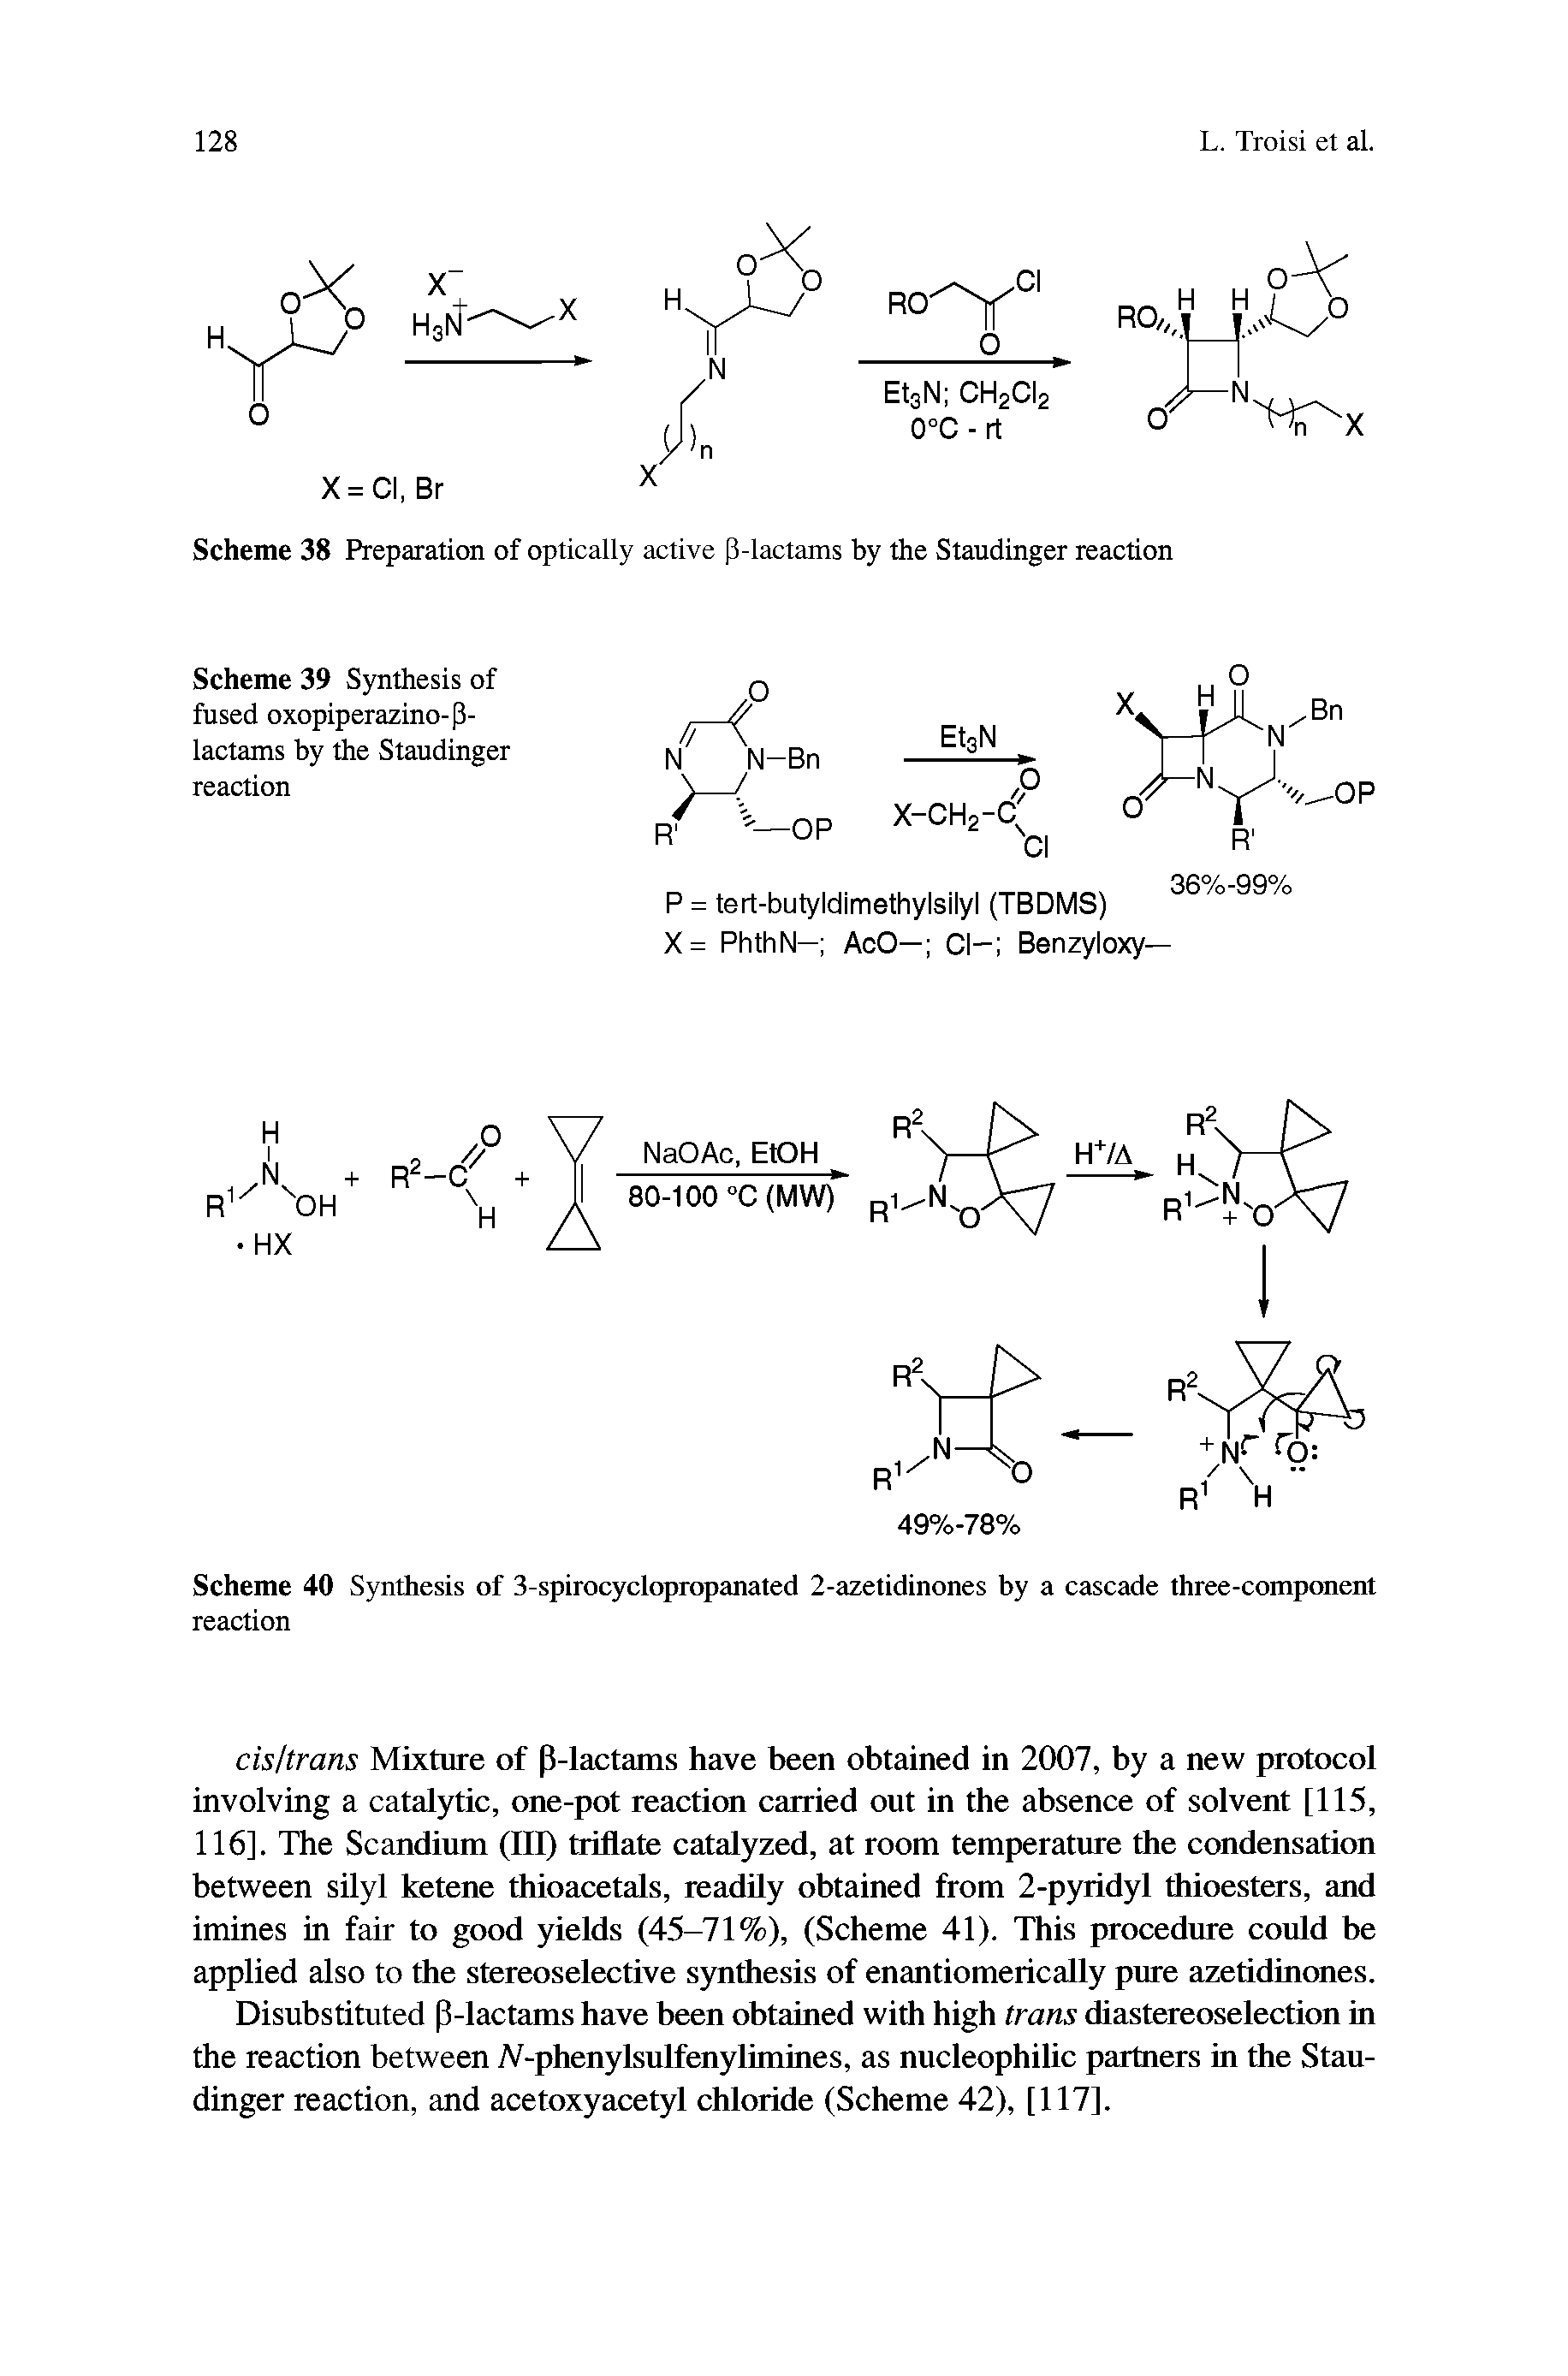 Scheme 40 Synthesis of 3-spirocyclopropanated 2-azetidinones by a cascade three-component reaction...